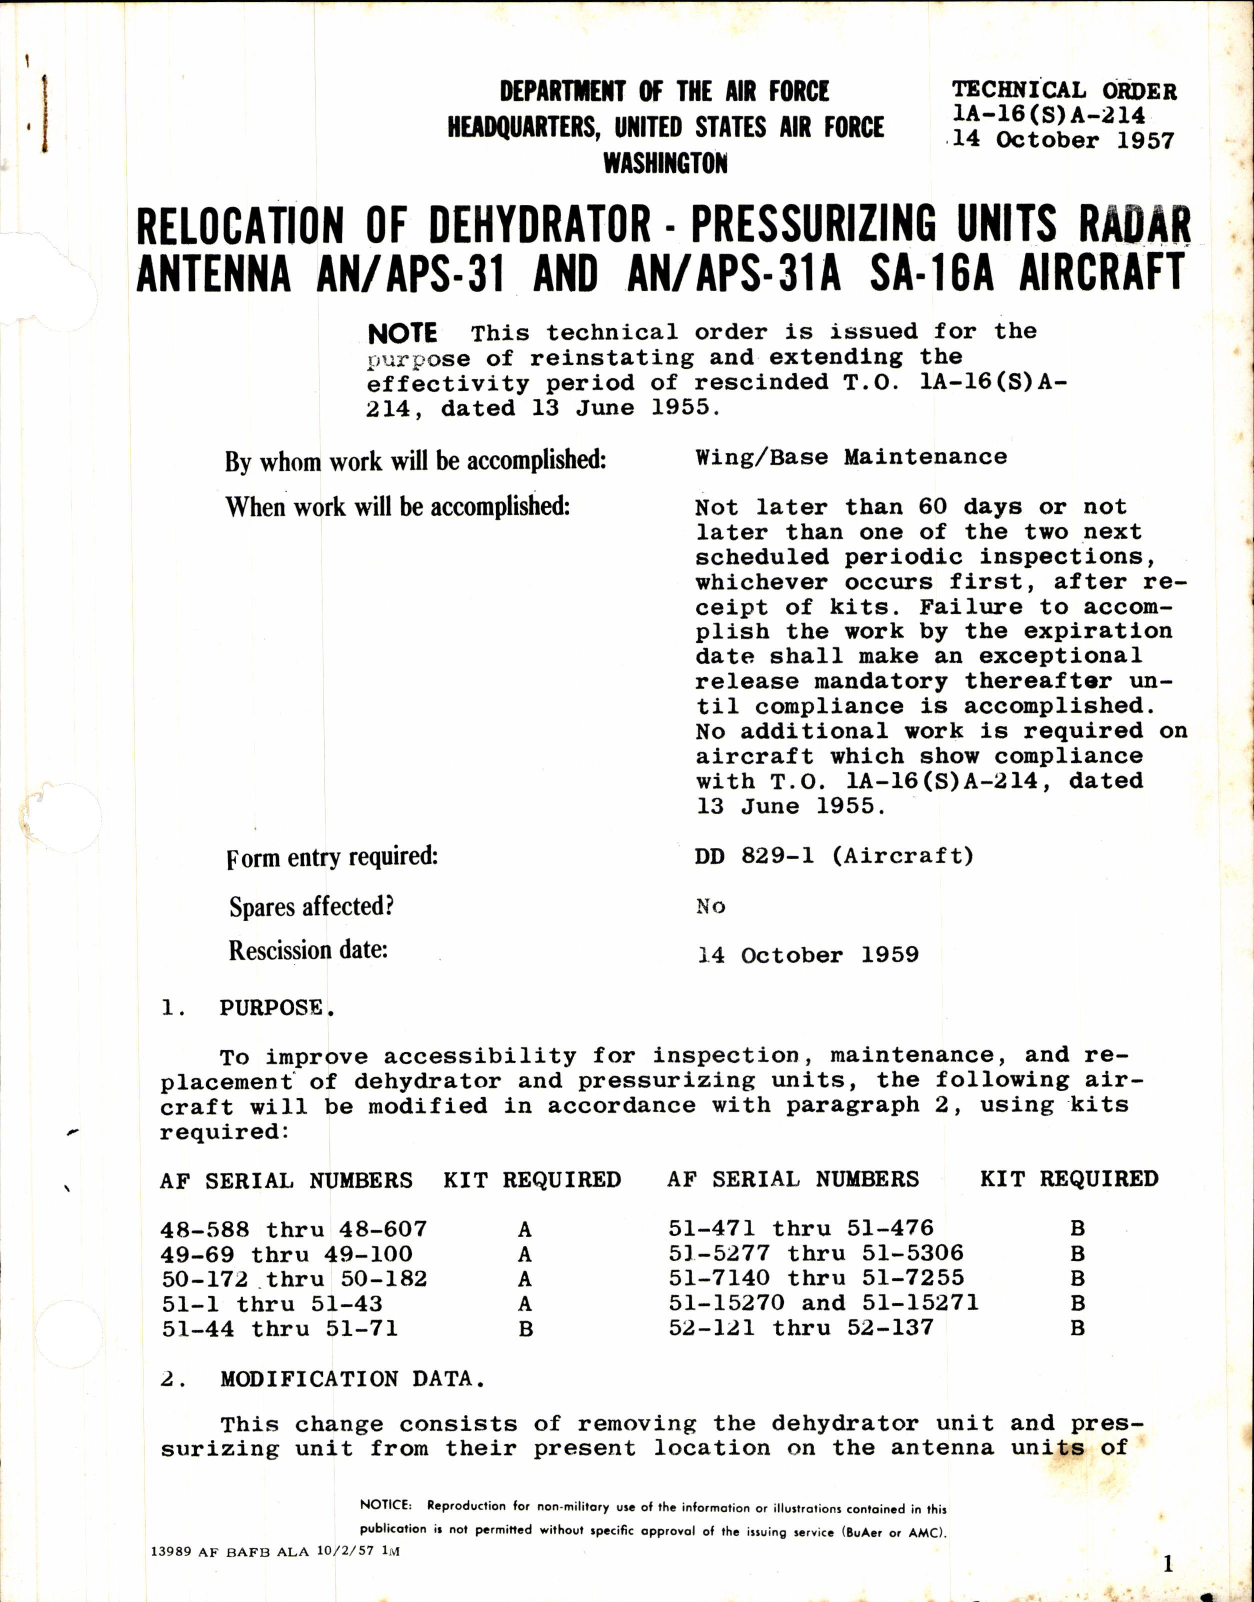 Sample page 1 from AirCorps Library document: Relocation of Dehydrator Pressurizing Units Radar Antenna AN/APS-31 and AN/APS-31A